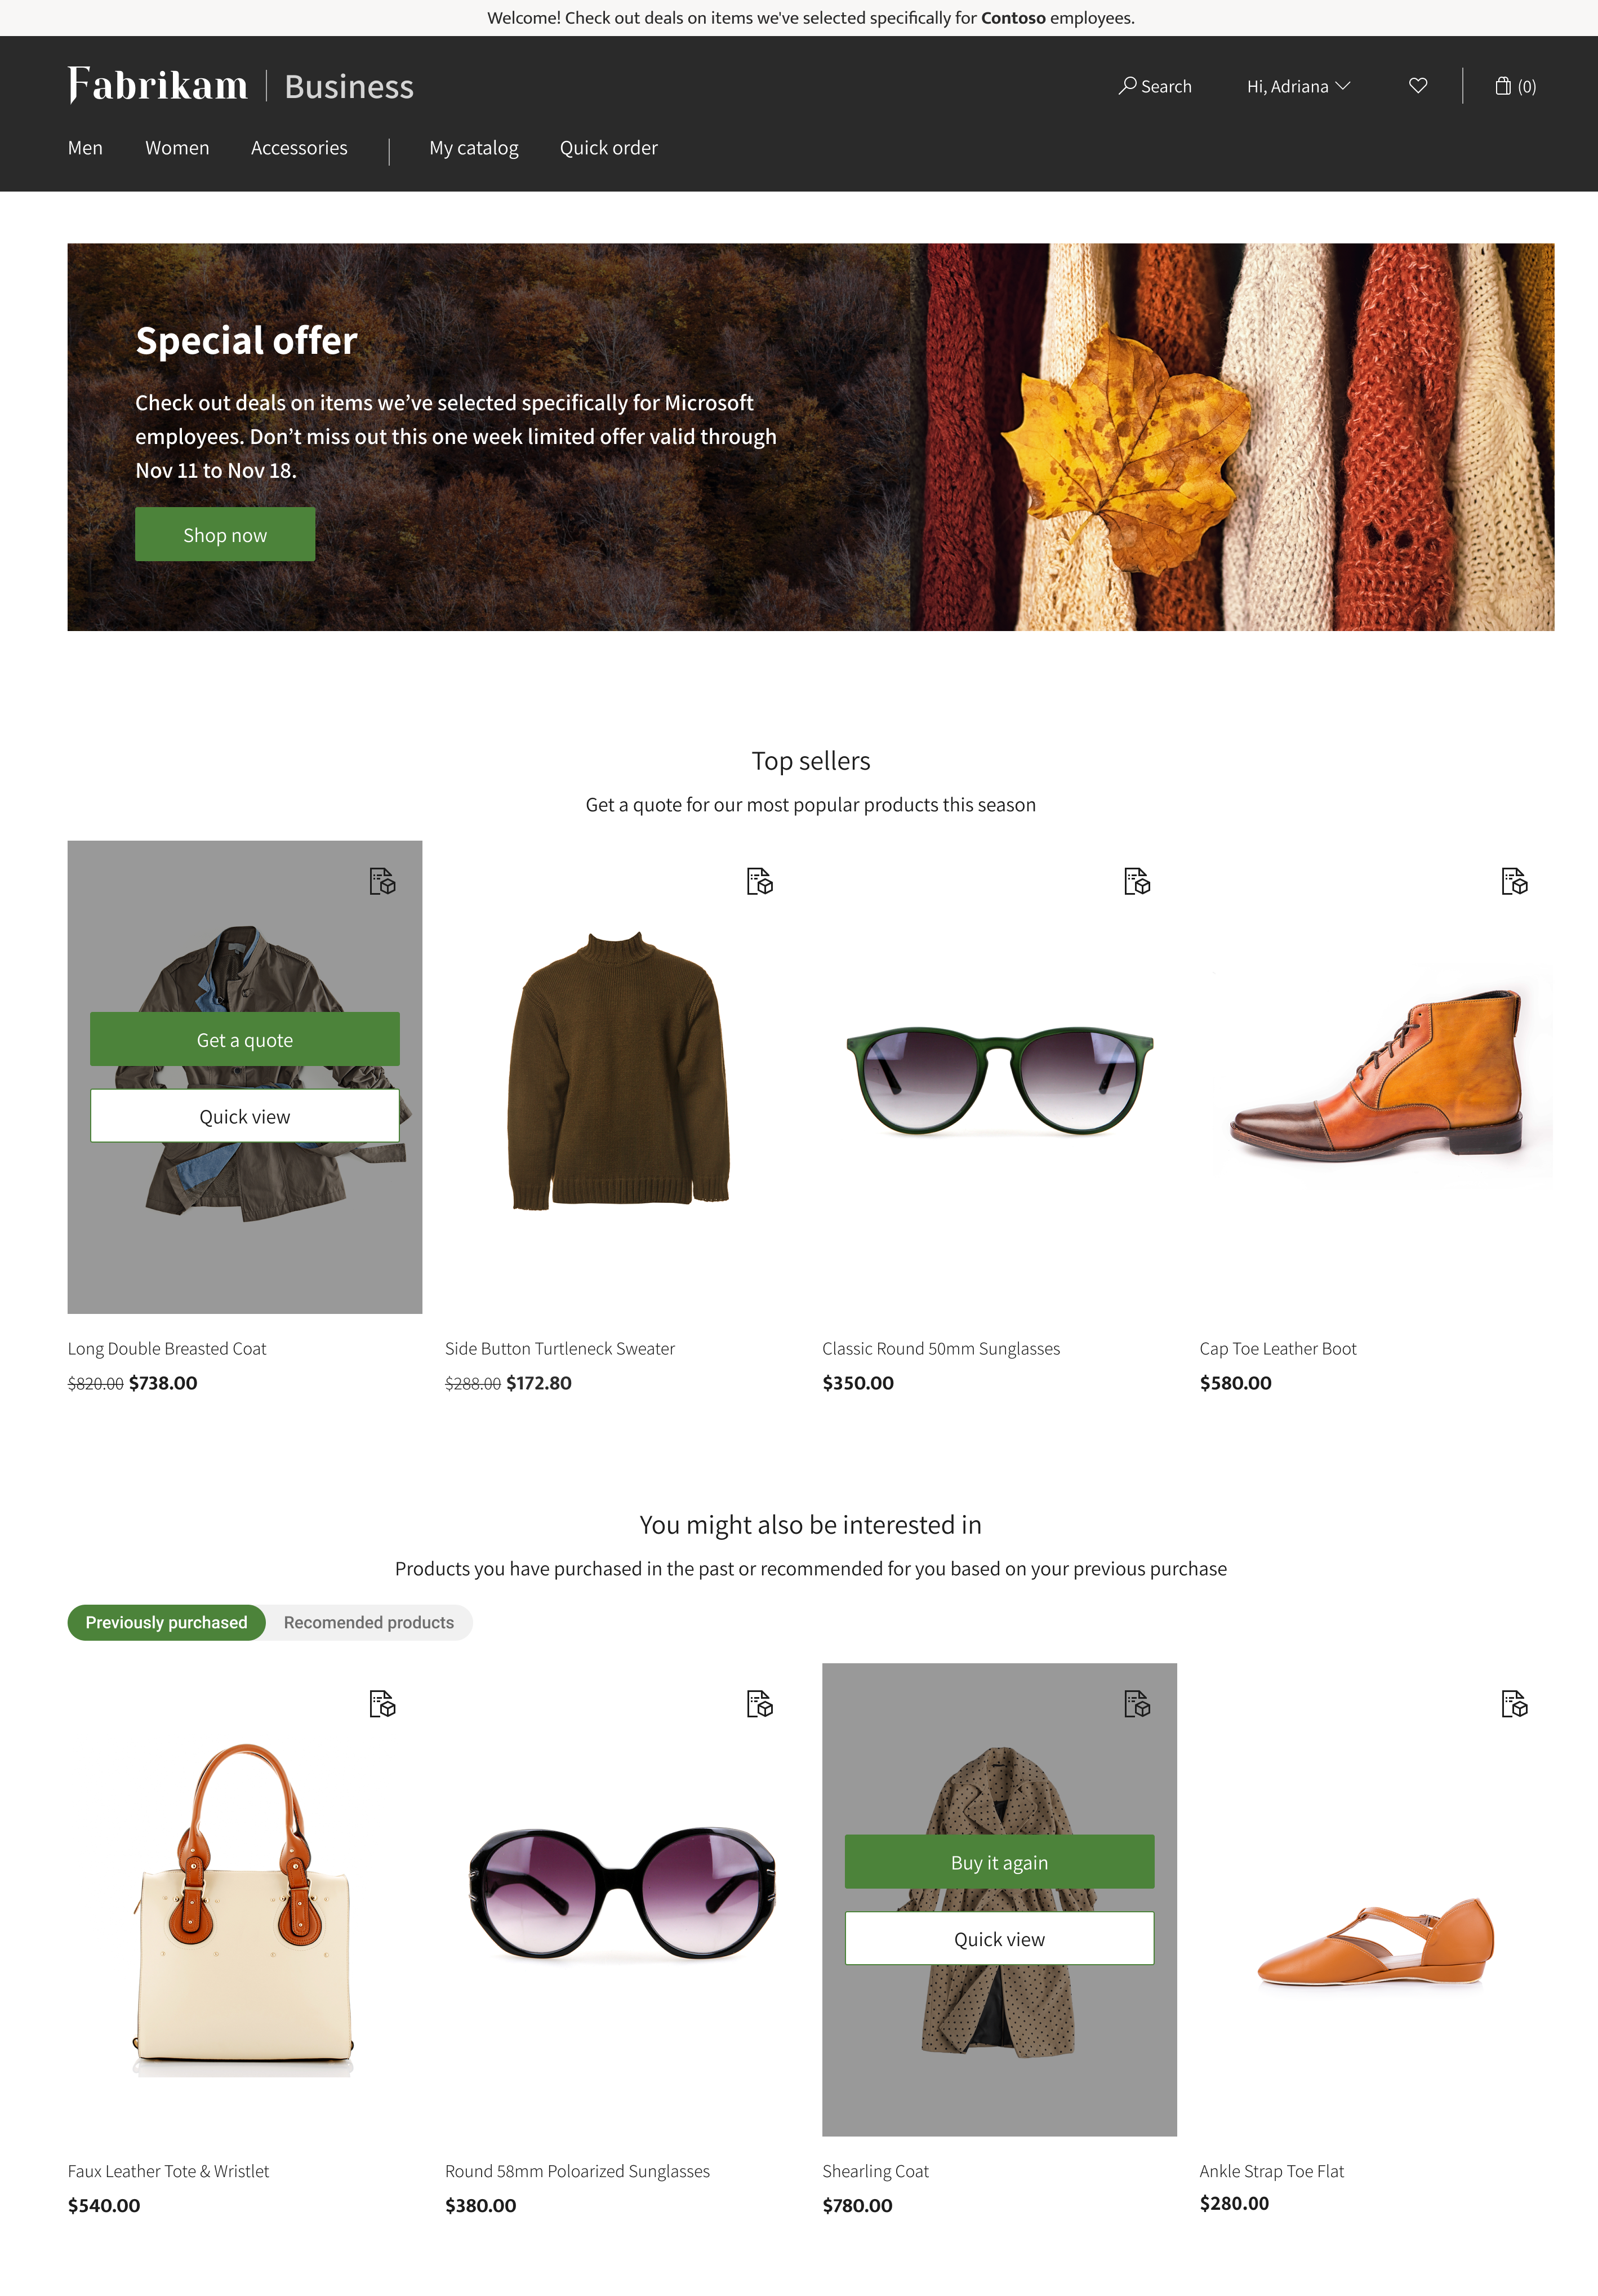 An e-commerce page with Fabrikam Business header and Special offer banner at the top. Product images are showcased with headers of 